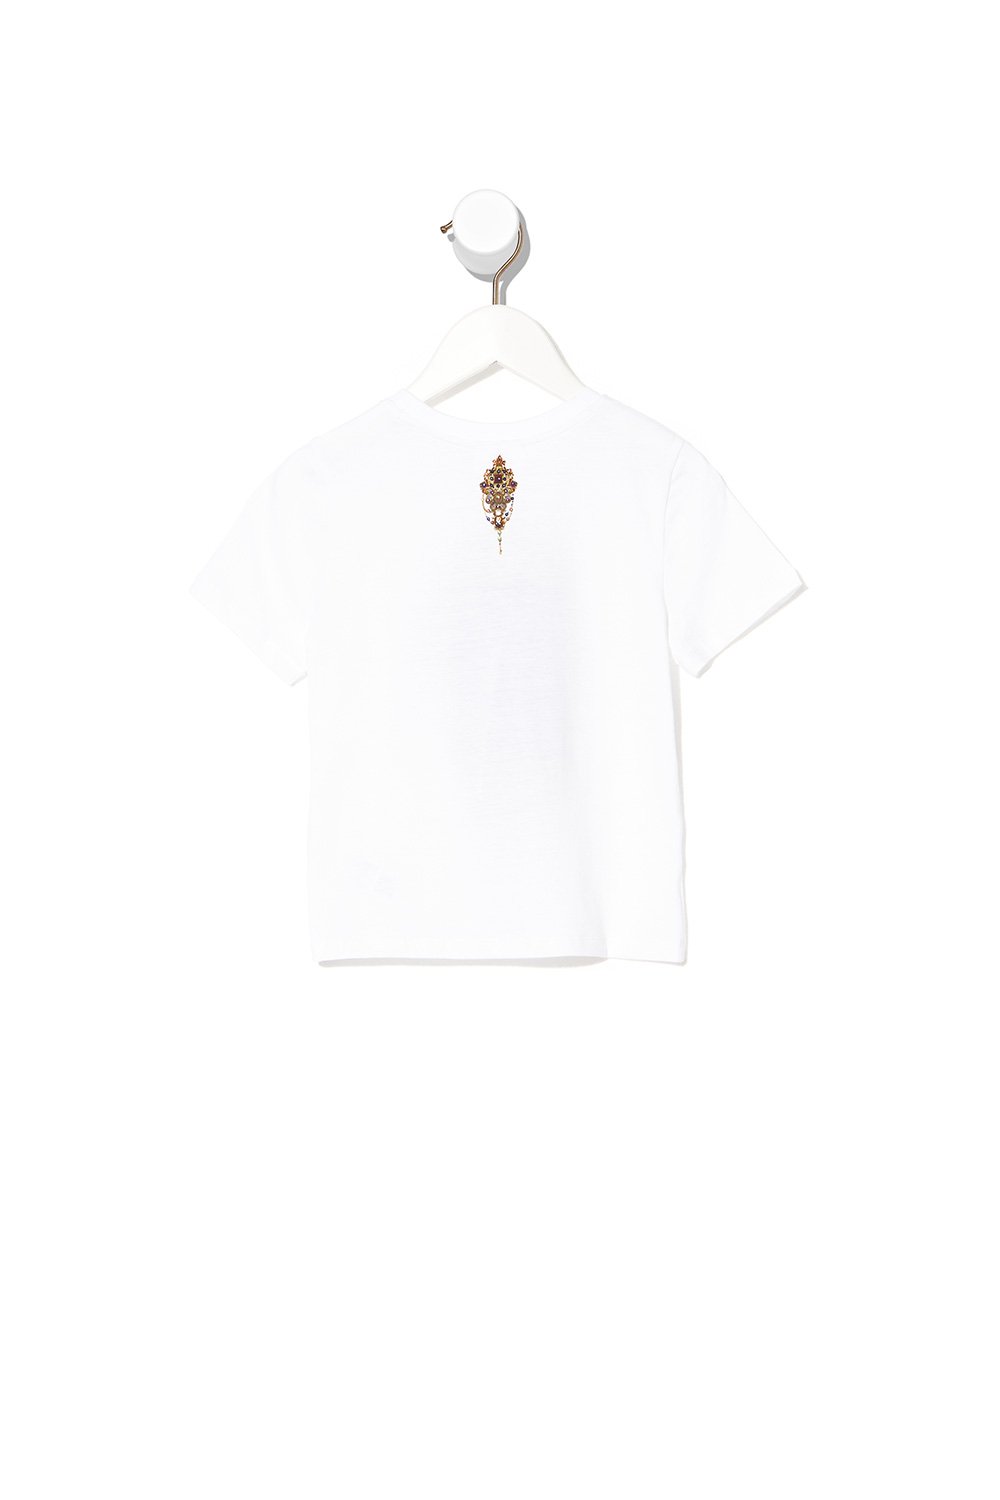 KIDS SHORT SLEEVE T-SHIRT 12-14 BY THE MEADOW